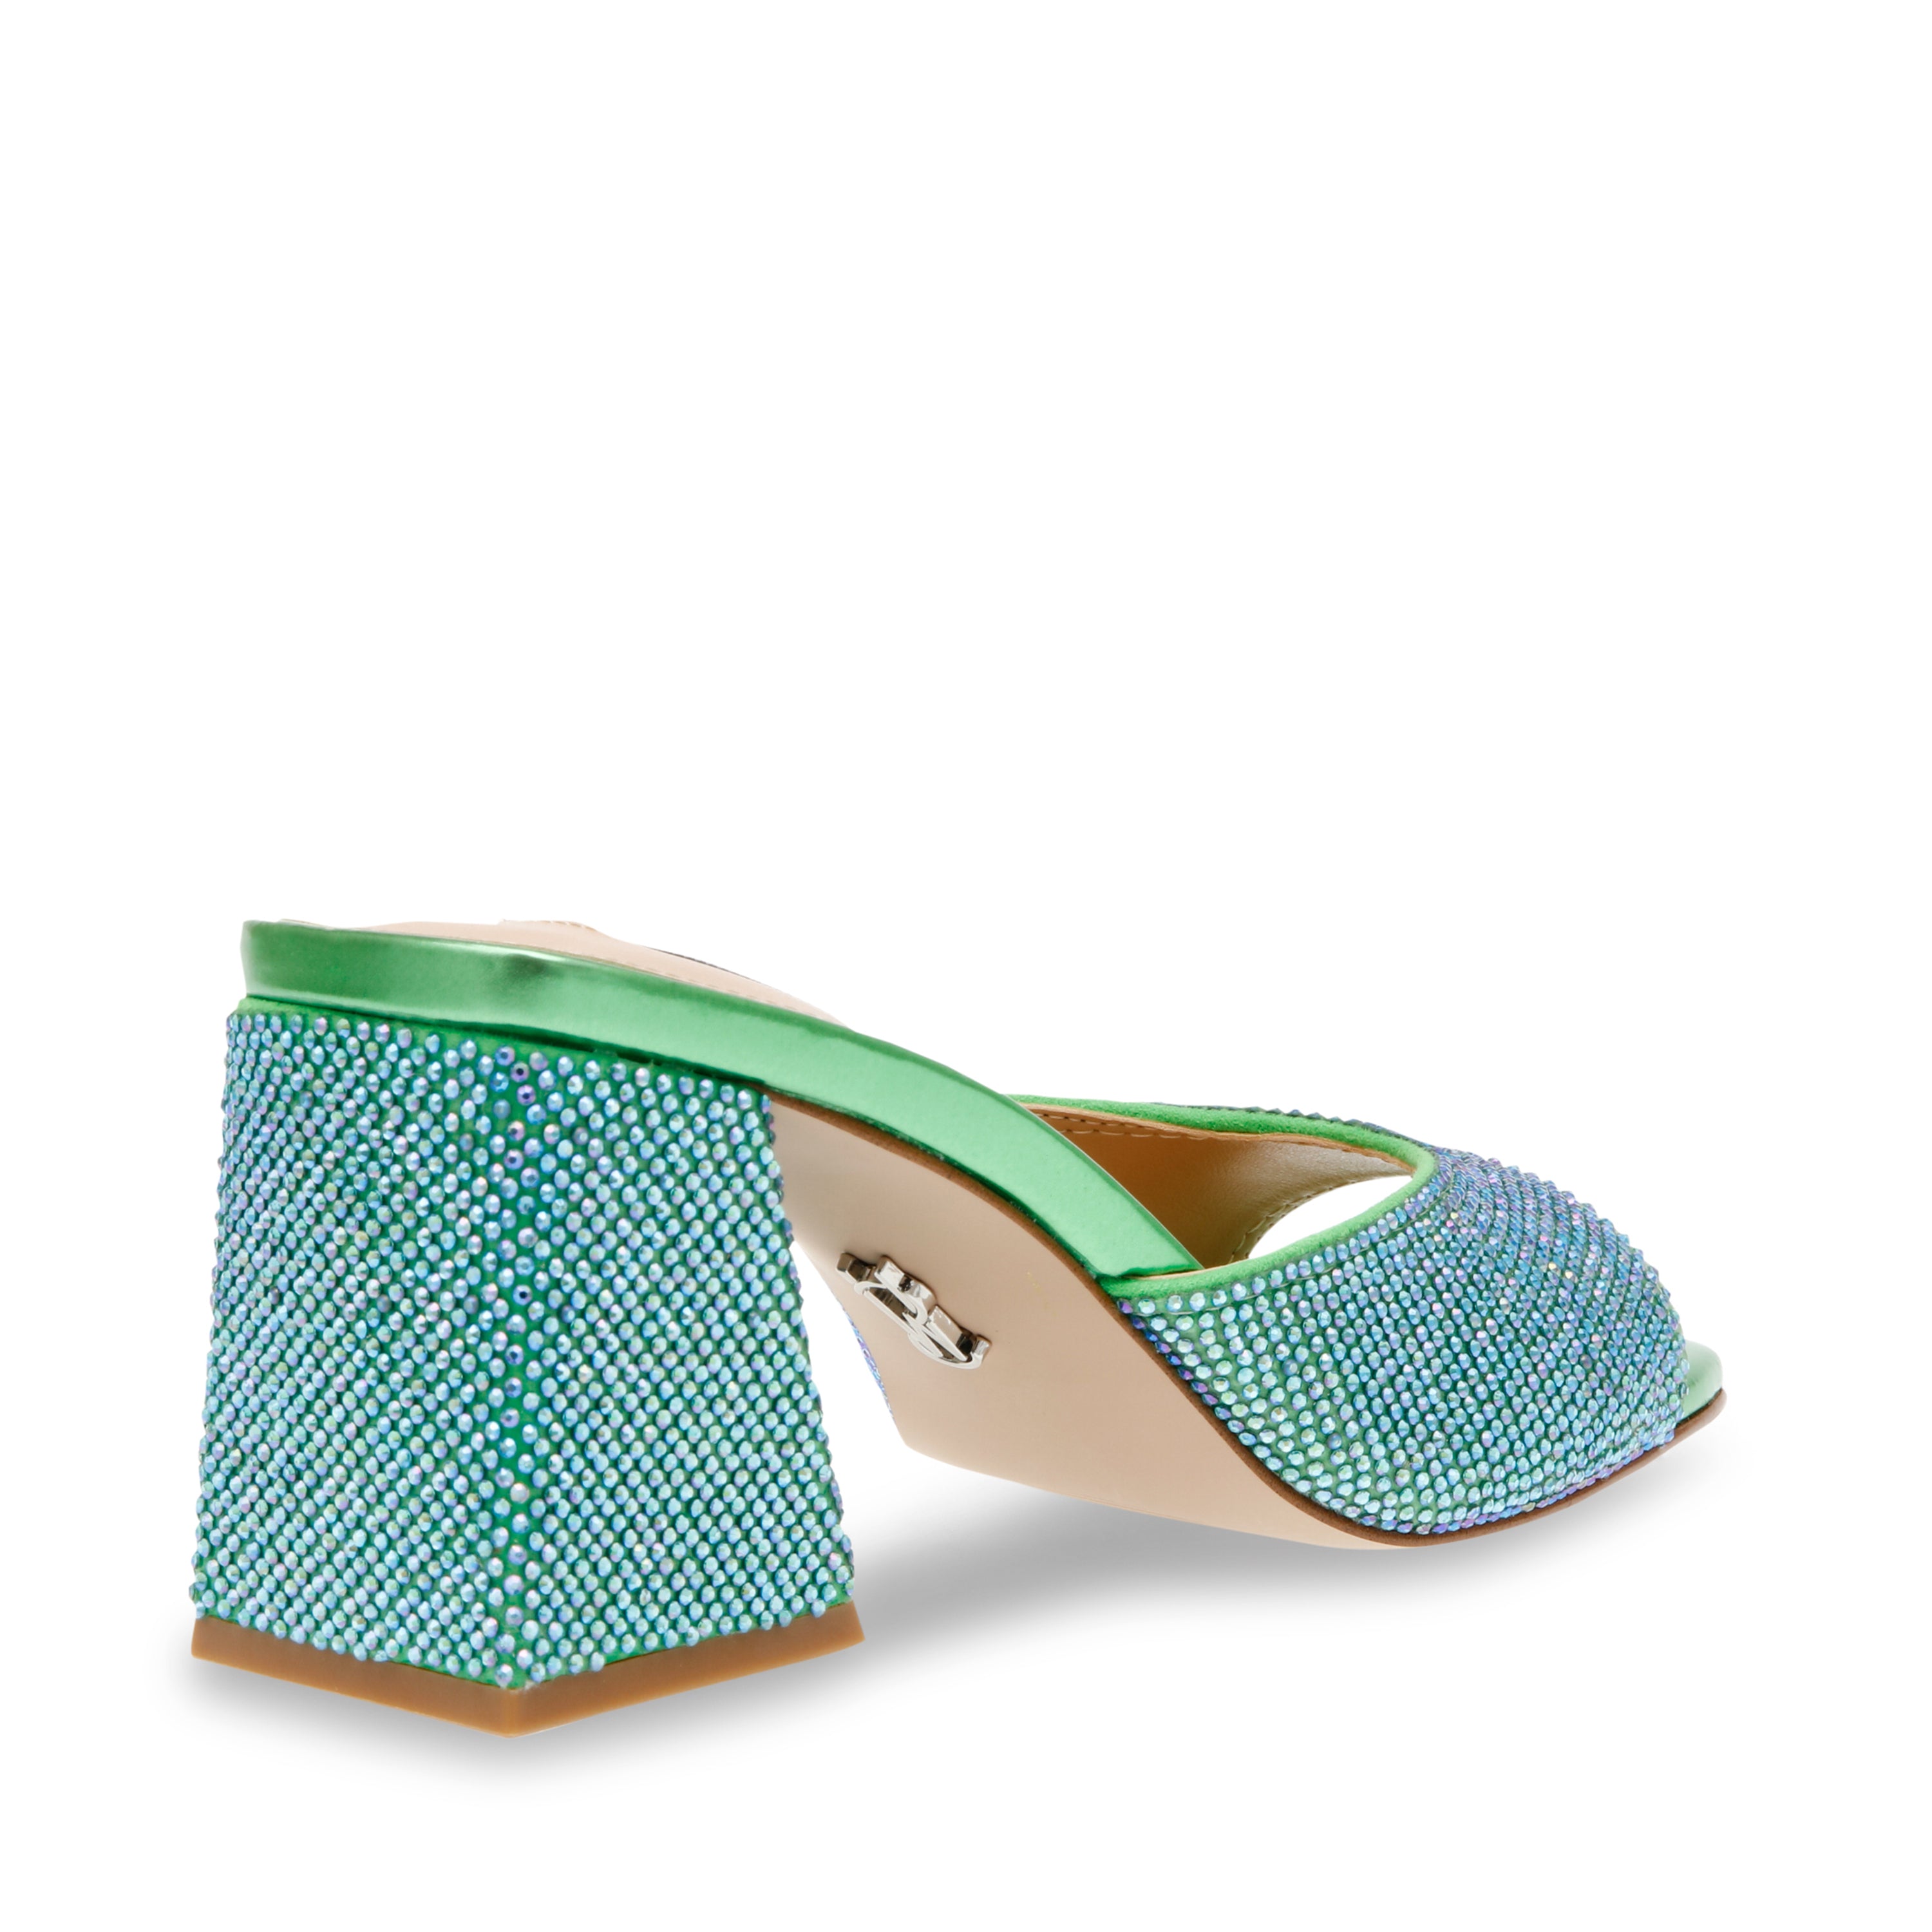 Glowing-R Sandal Green/Blue- Hover Image